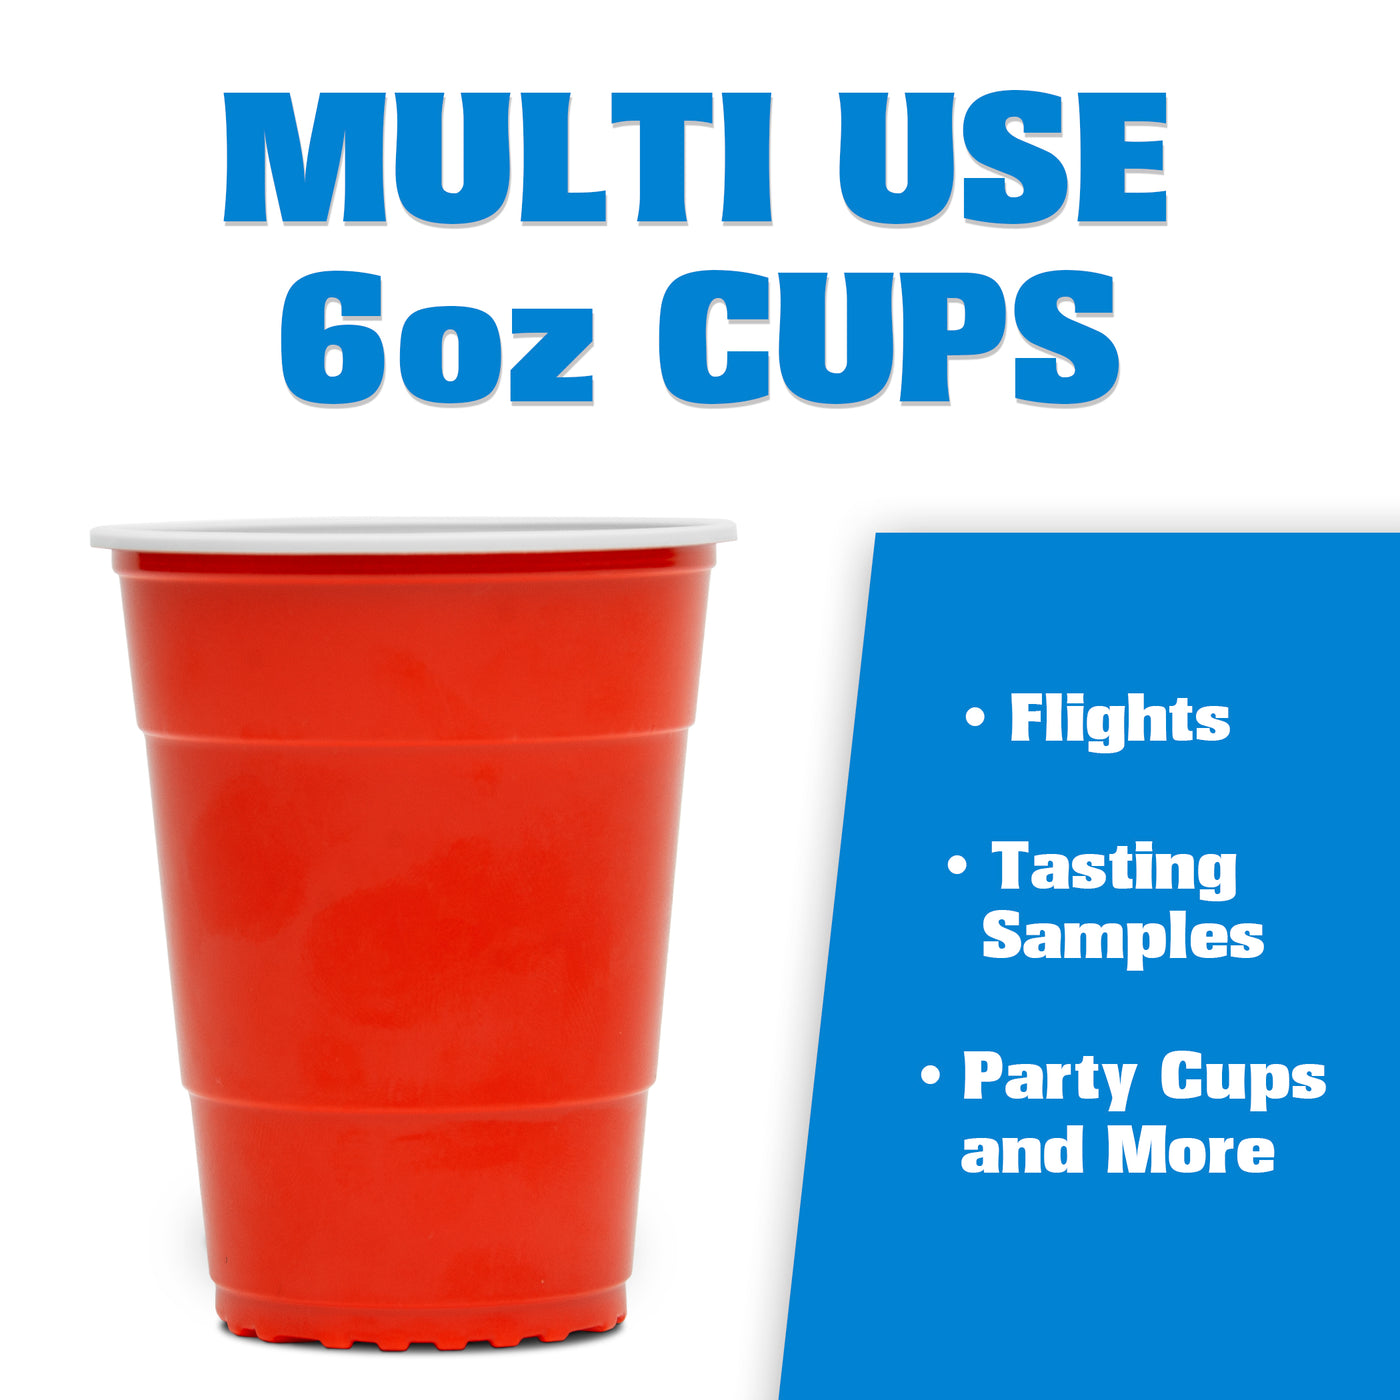 Gobig Giant 110 Oz Red Party Cup 24 Pack With 4 Xl Pong Balls - 24